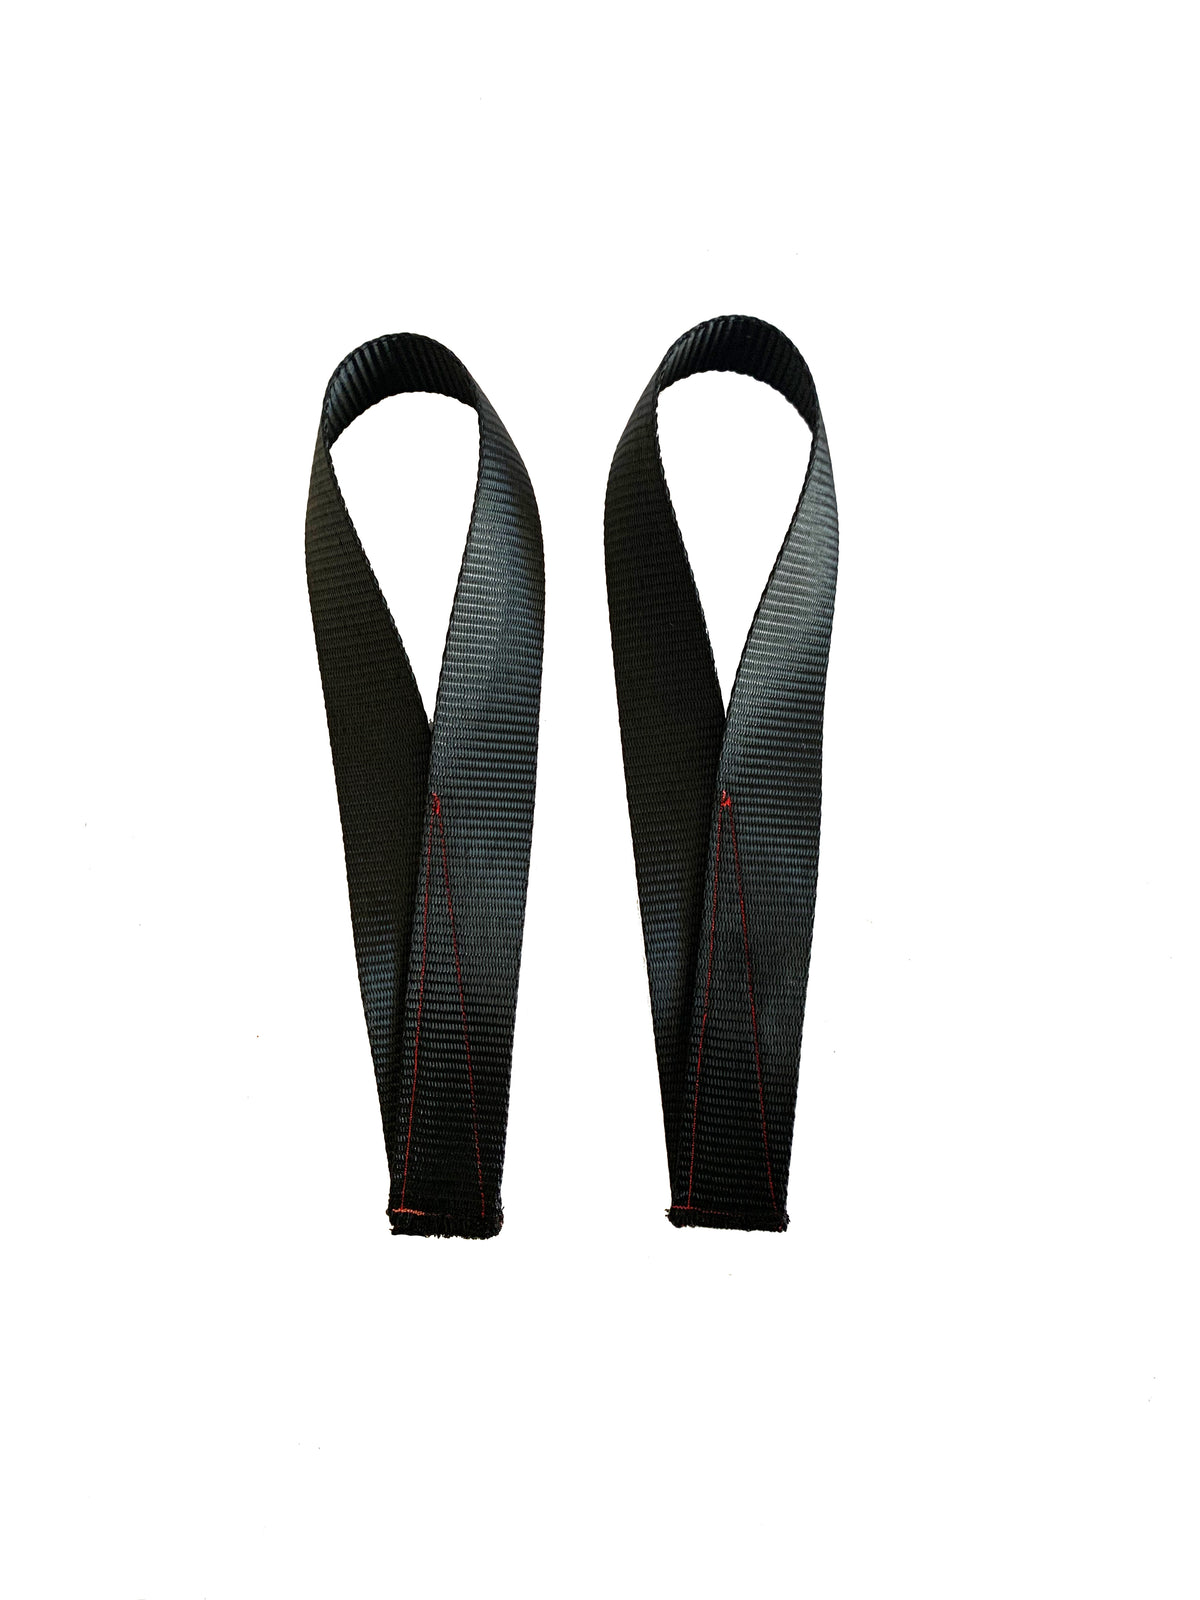 Black Olympic Lifting Straps for Weightlifting